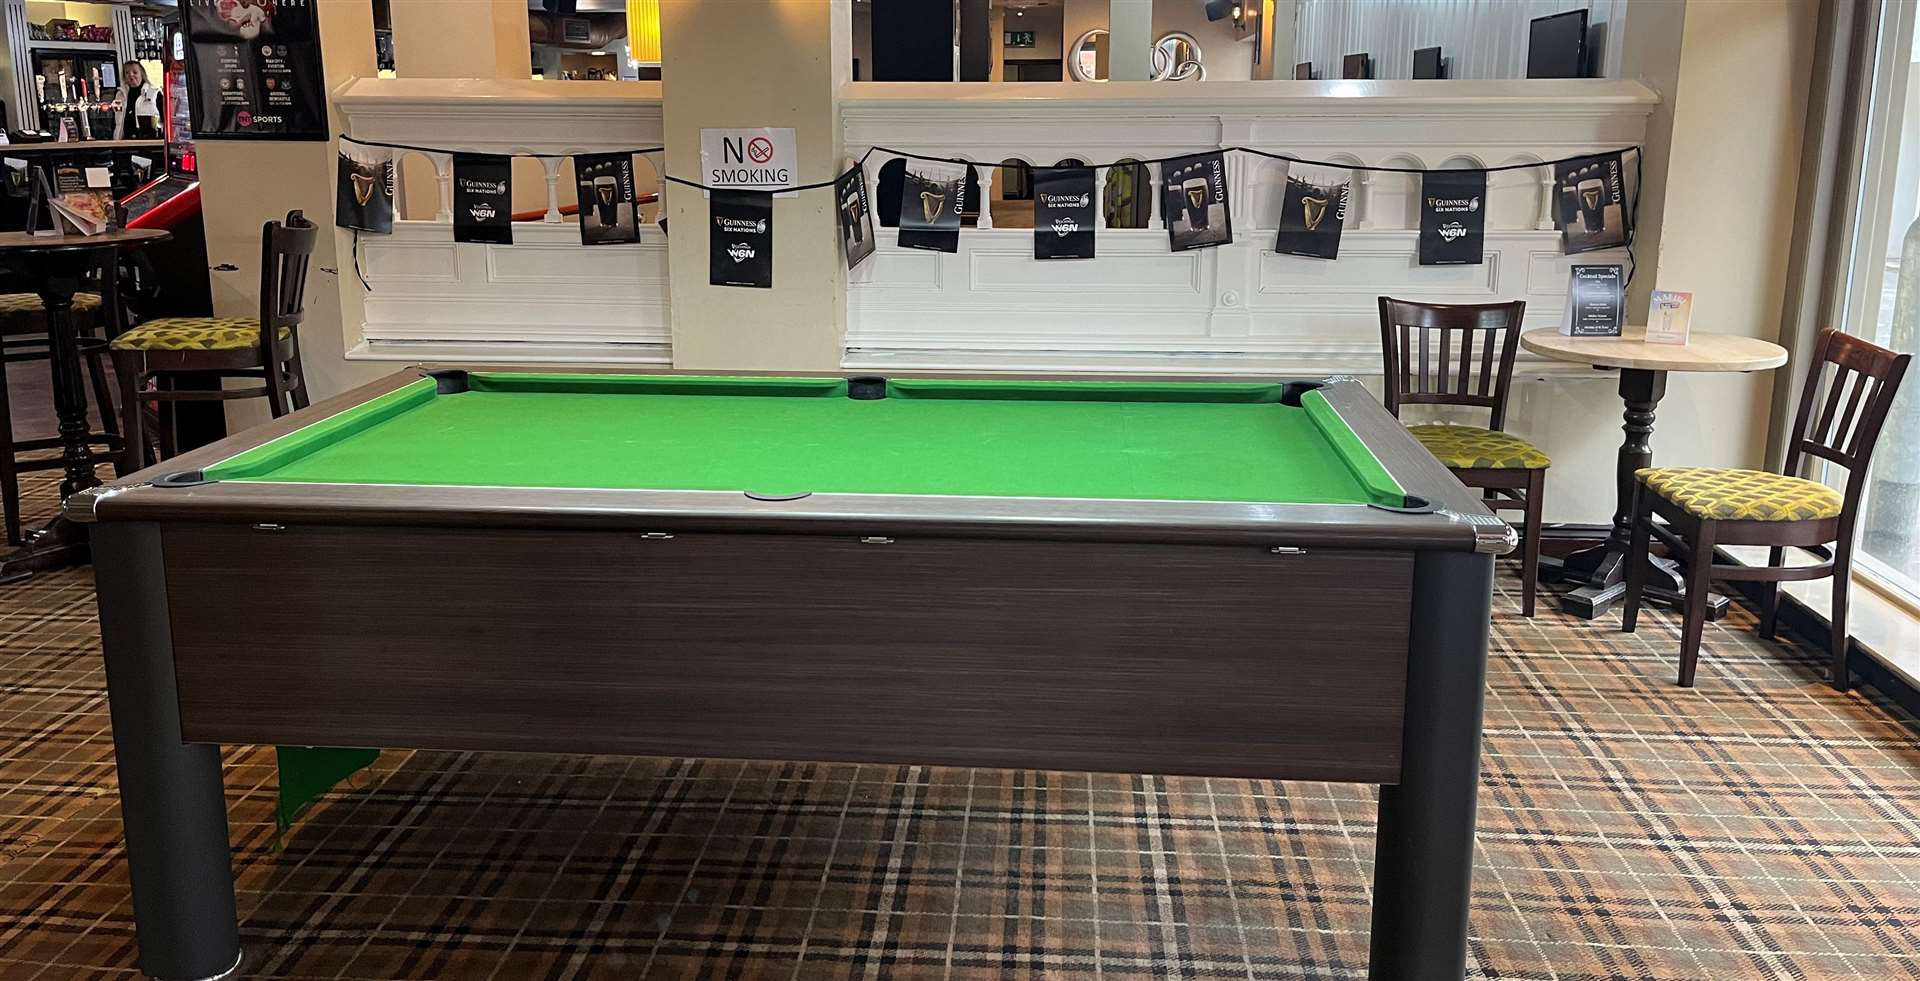 One of the new pool tables installed at The Phoenix in Ashford